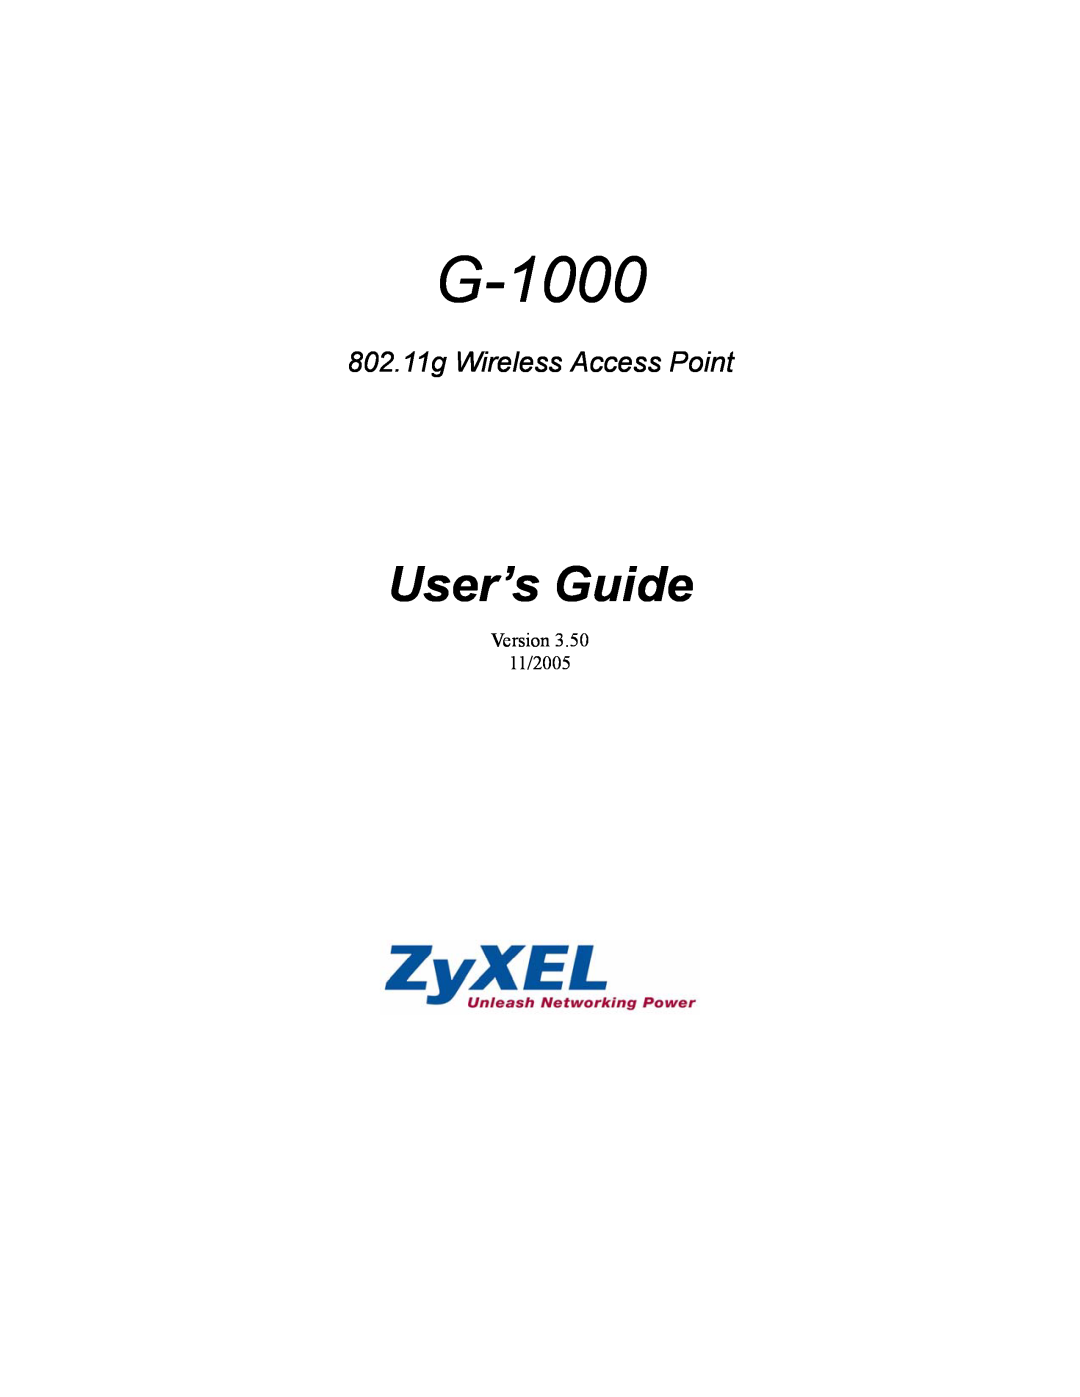 ZyXEL Communications G-1000 manual User’s Guide, 802.11g Wireless Access Point 